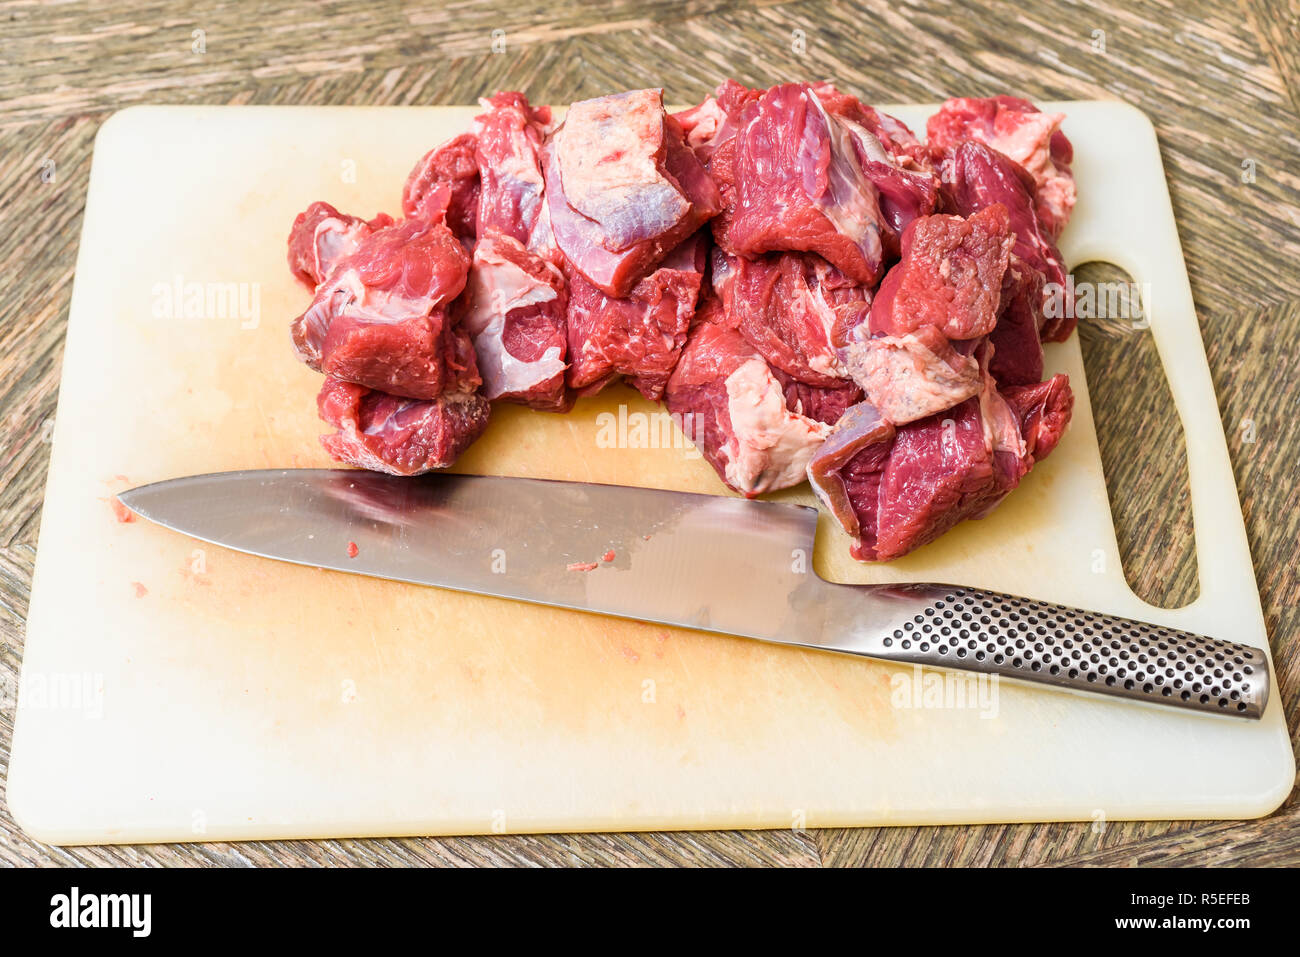 Pile of cut raw meat (chuck part) and knife on cutting board. Stock Photo